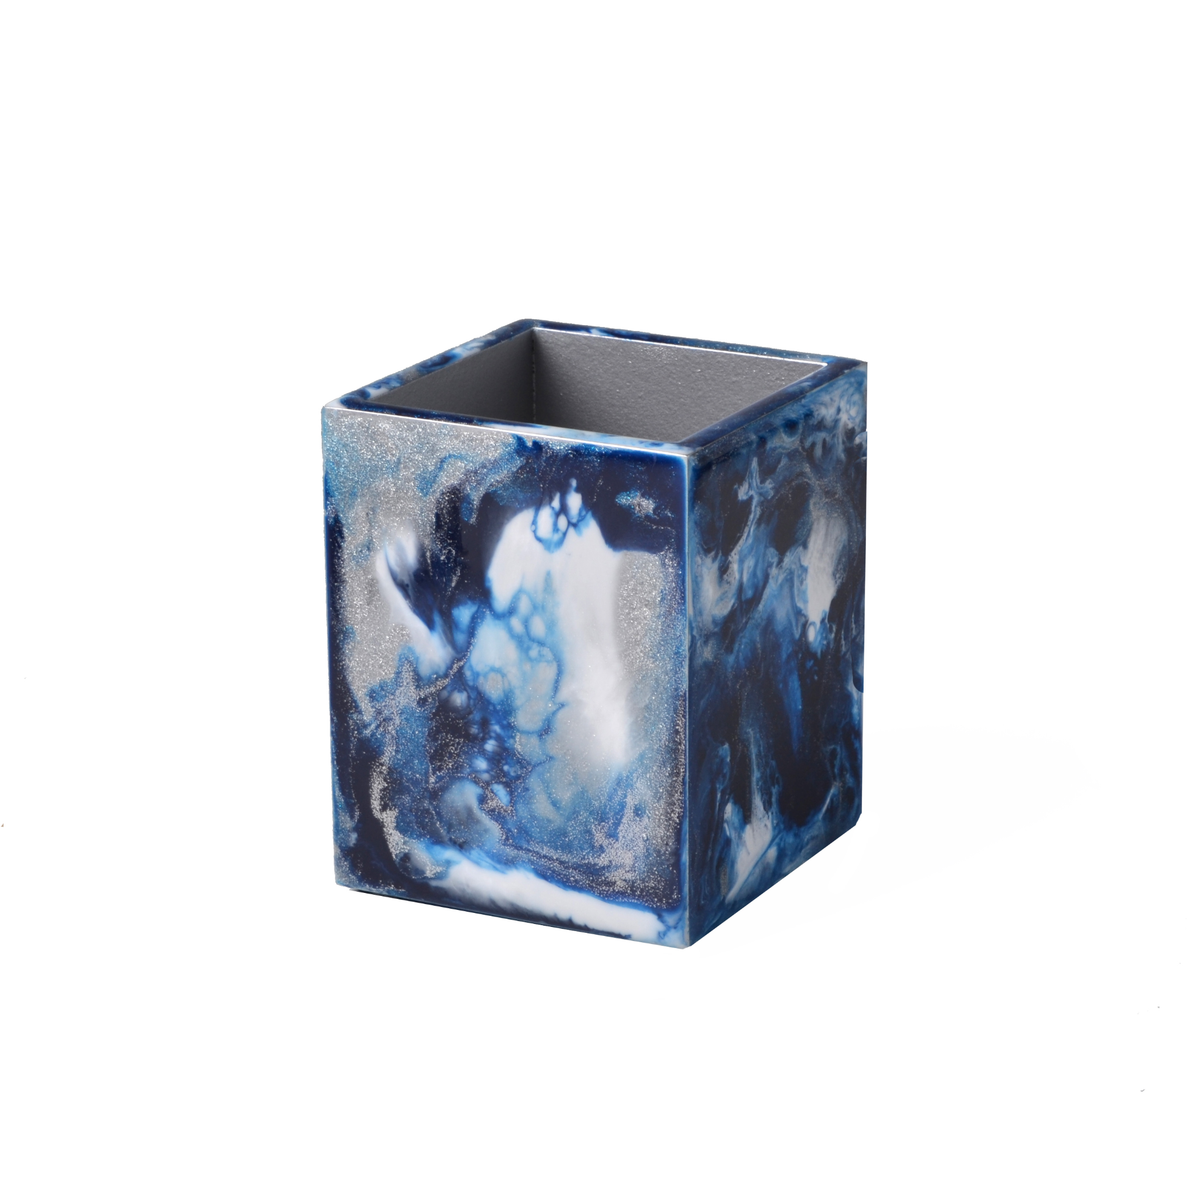 Brush Cup Holder of Mike and Ally Elan Bath Accessories Collectioin in Blue Medley Silver Color